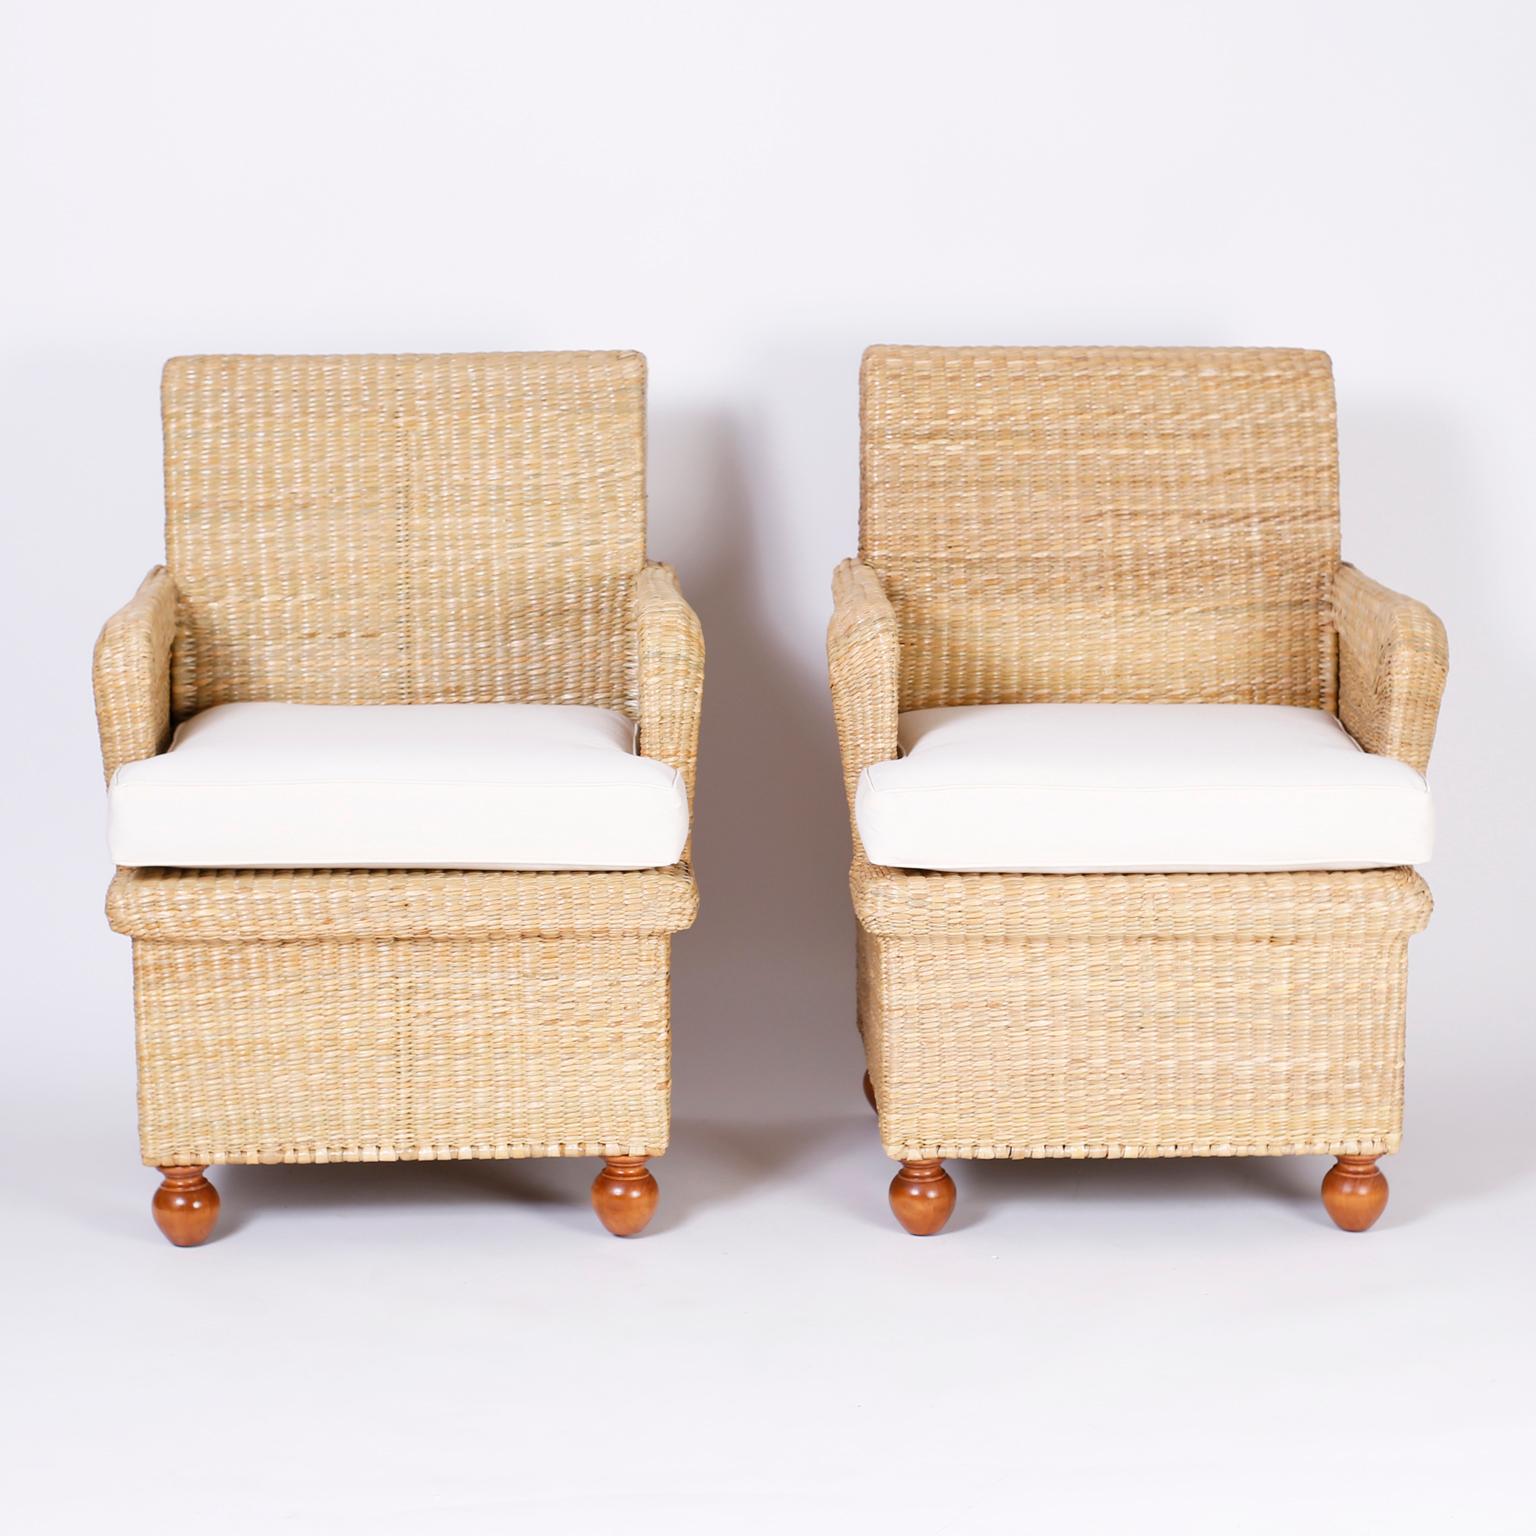 British Colonial armchairs crafted with a sturdy metal frame ambitiously wrapped in reed with comfort and classic form set on turned wood feet. Exclusively designed and offered by F.S. Henemader Antiques from the FS Flores collection. Priced per